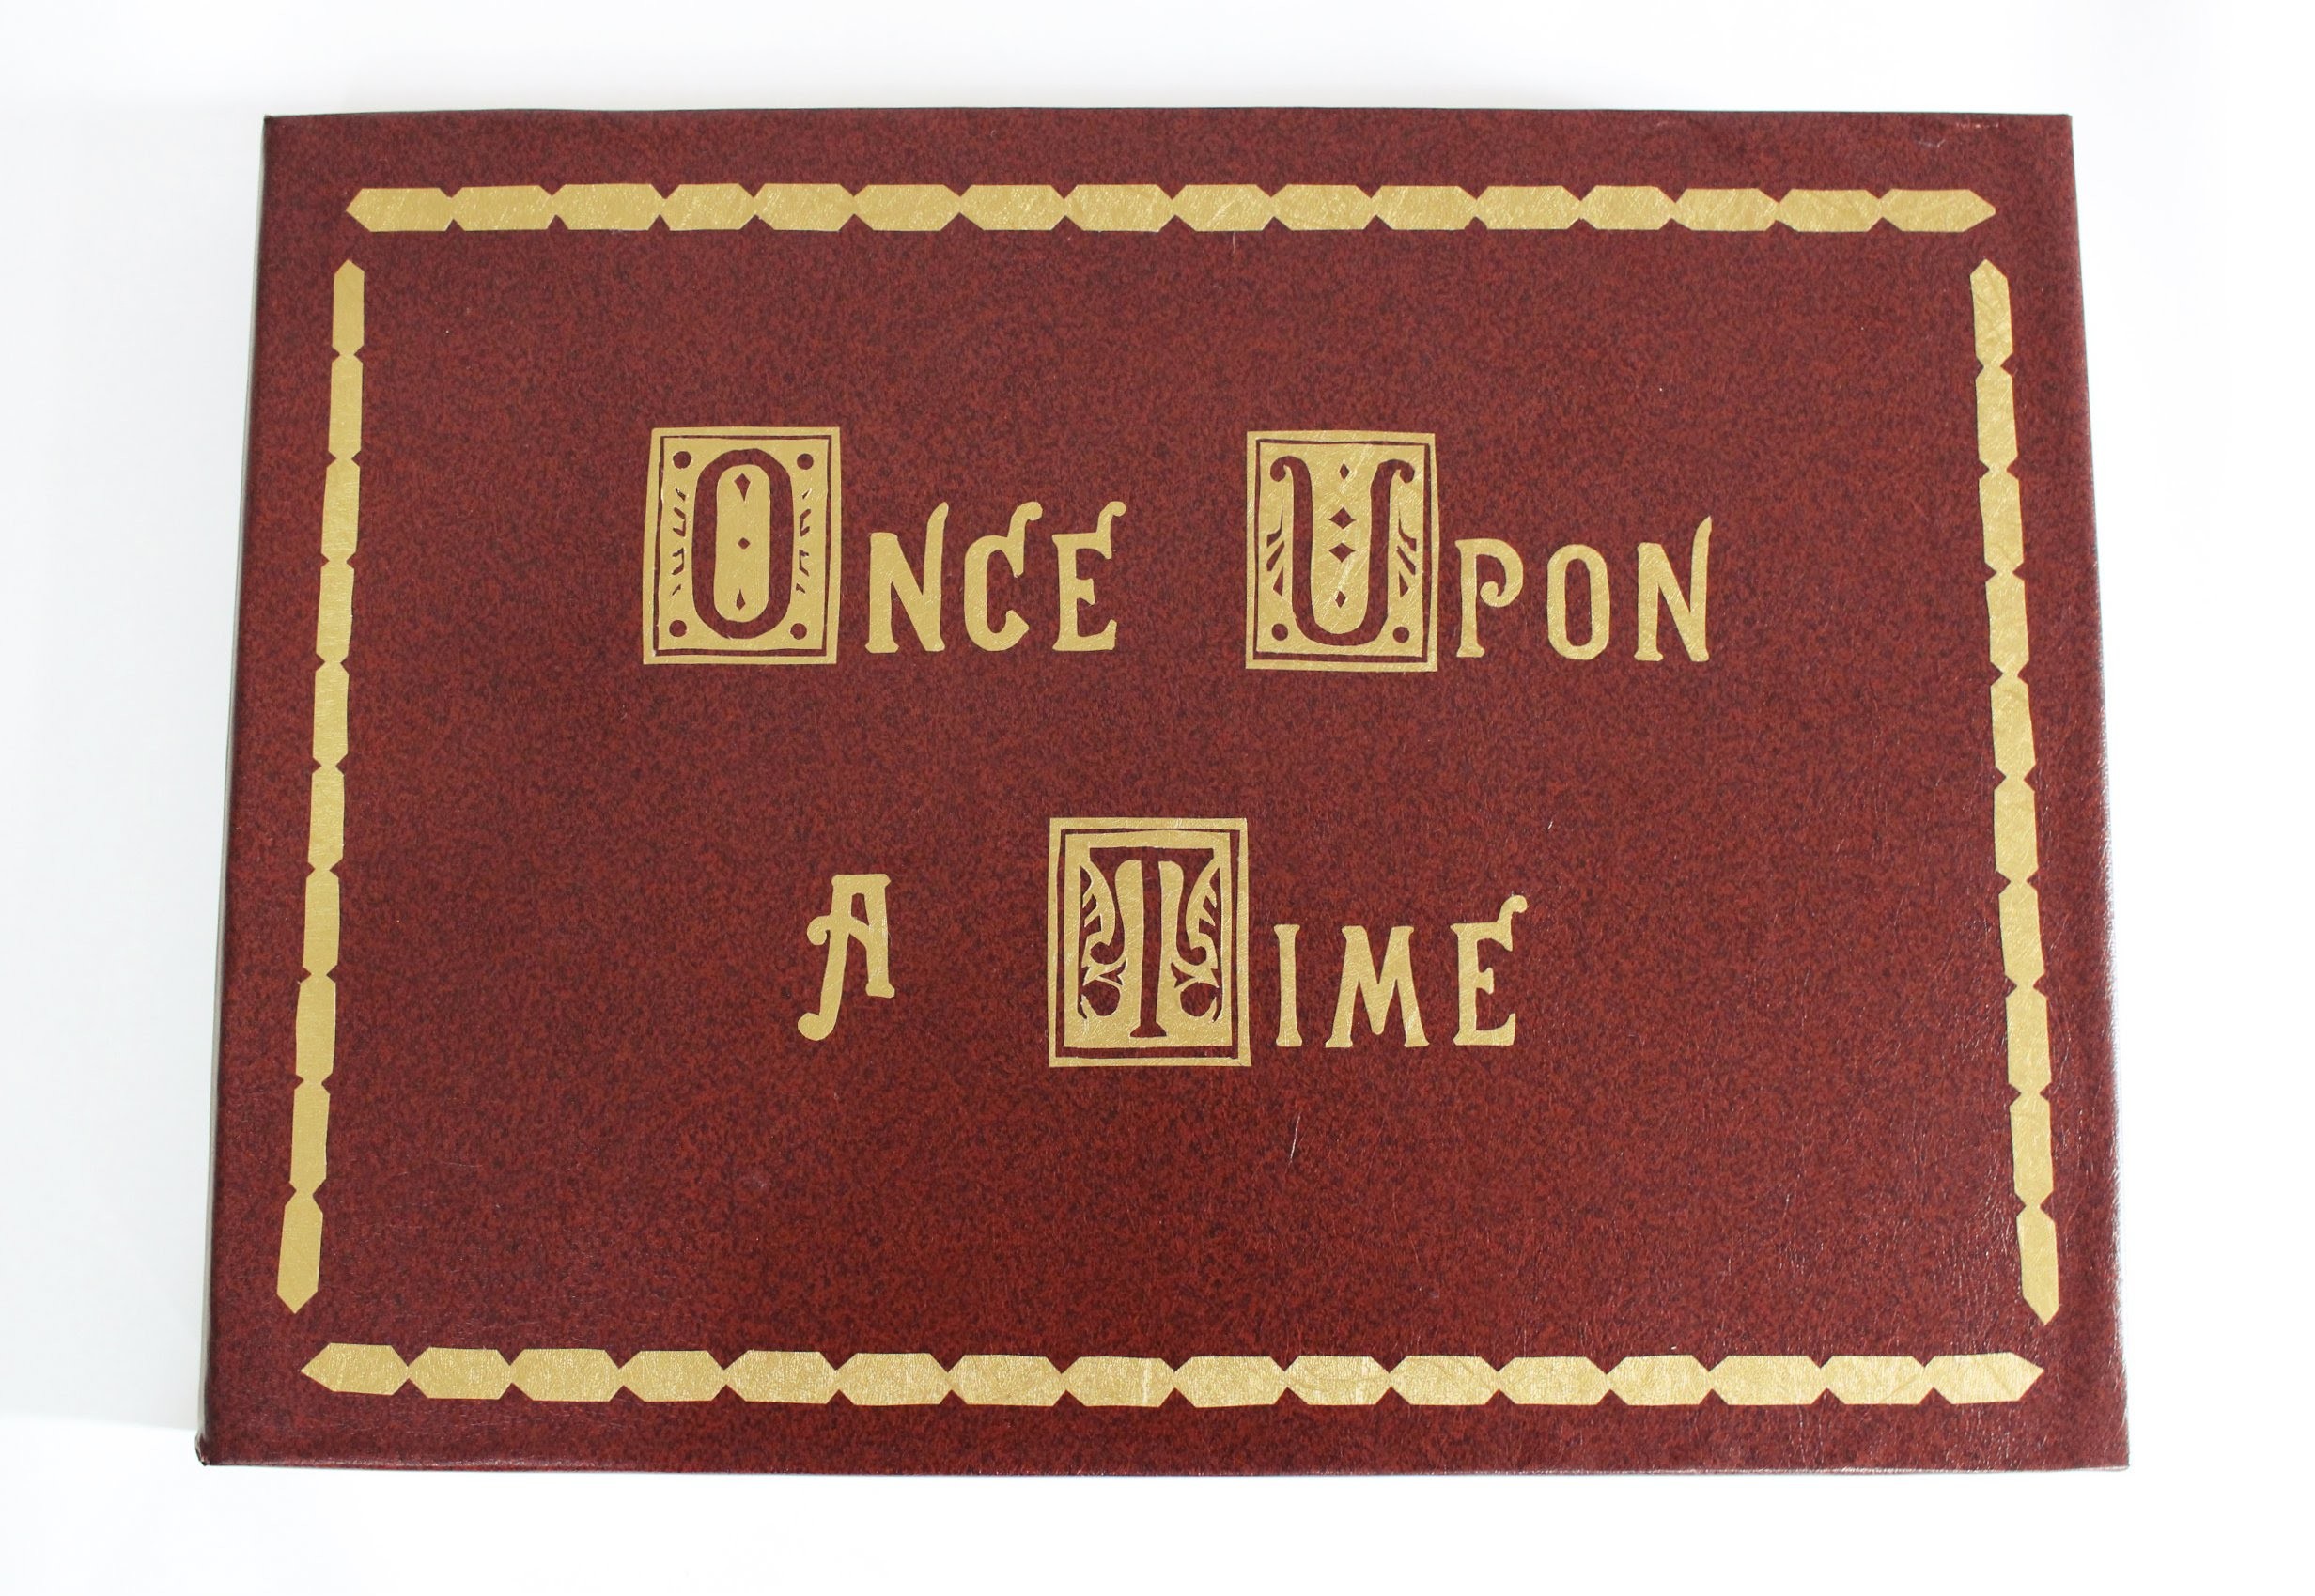 Once Upon a Time Book